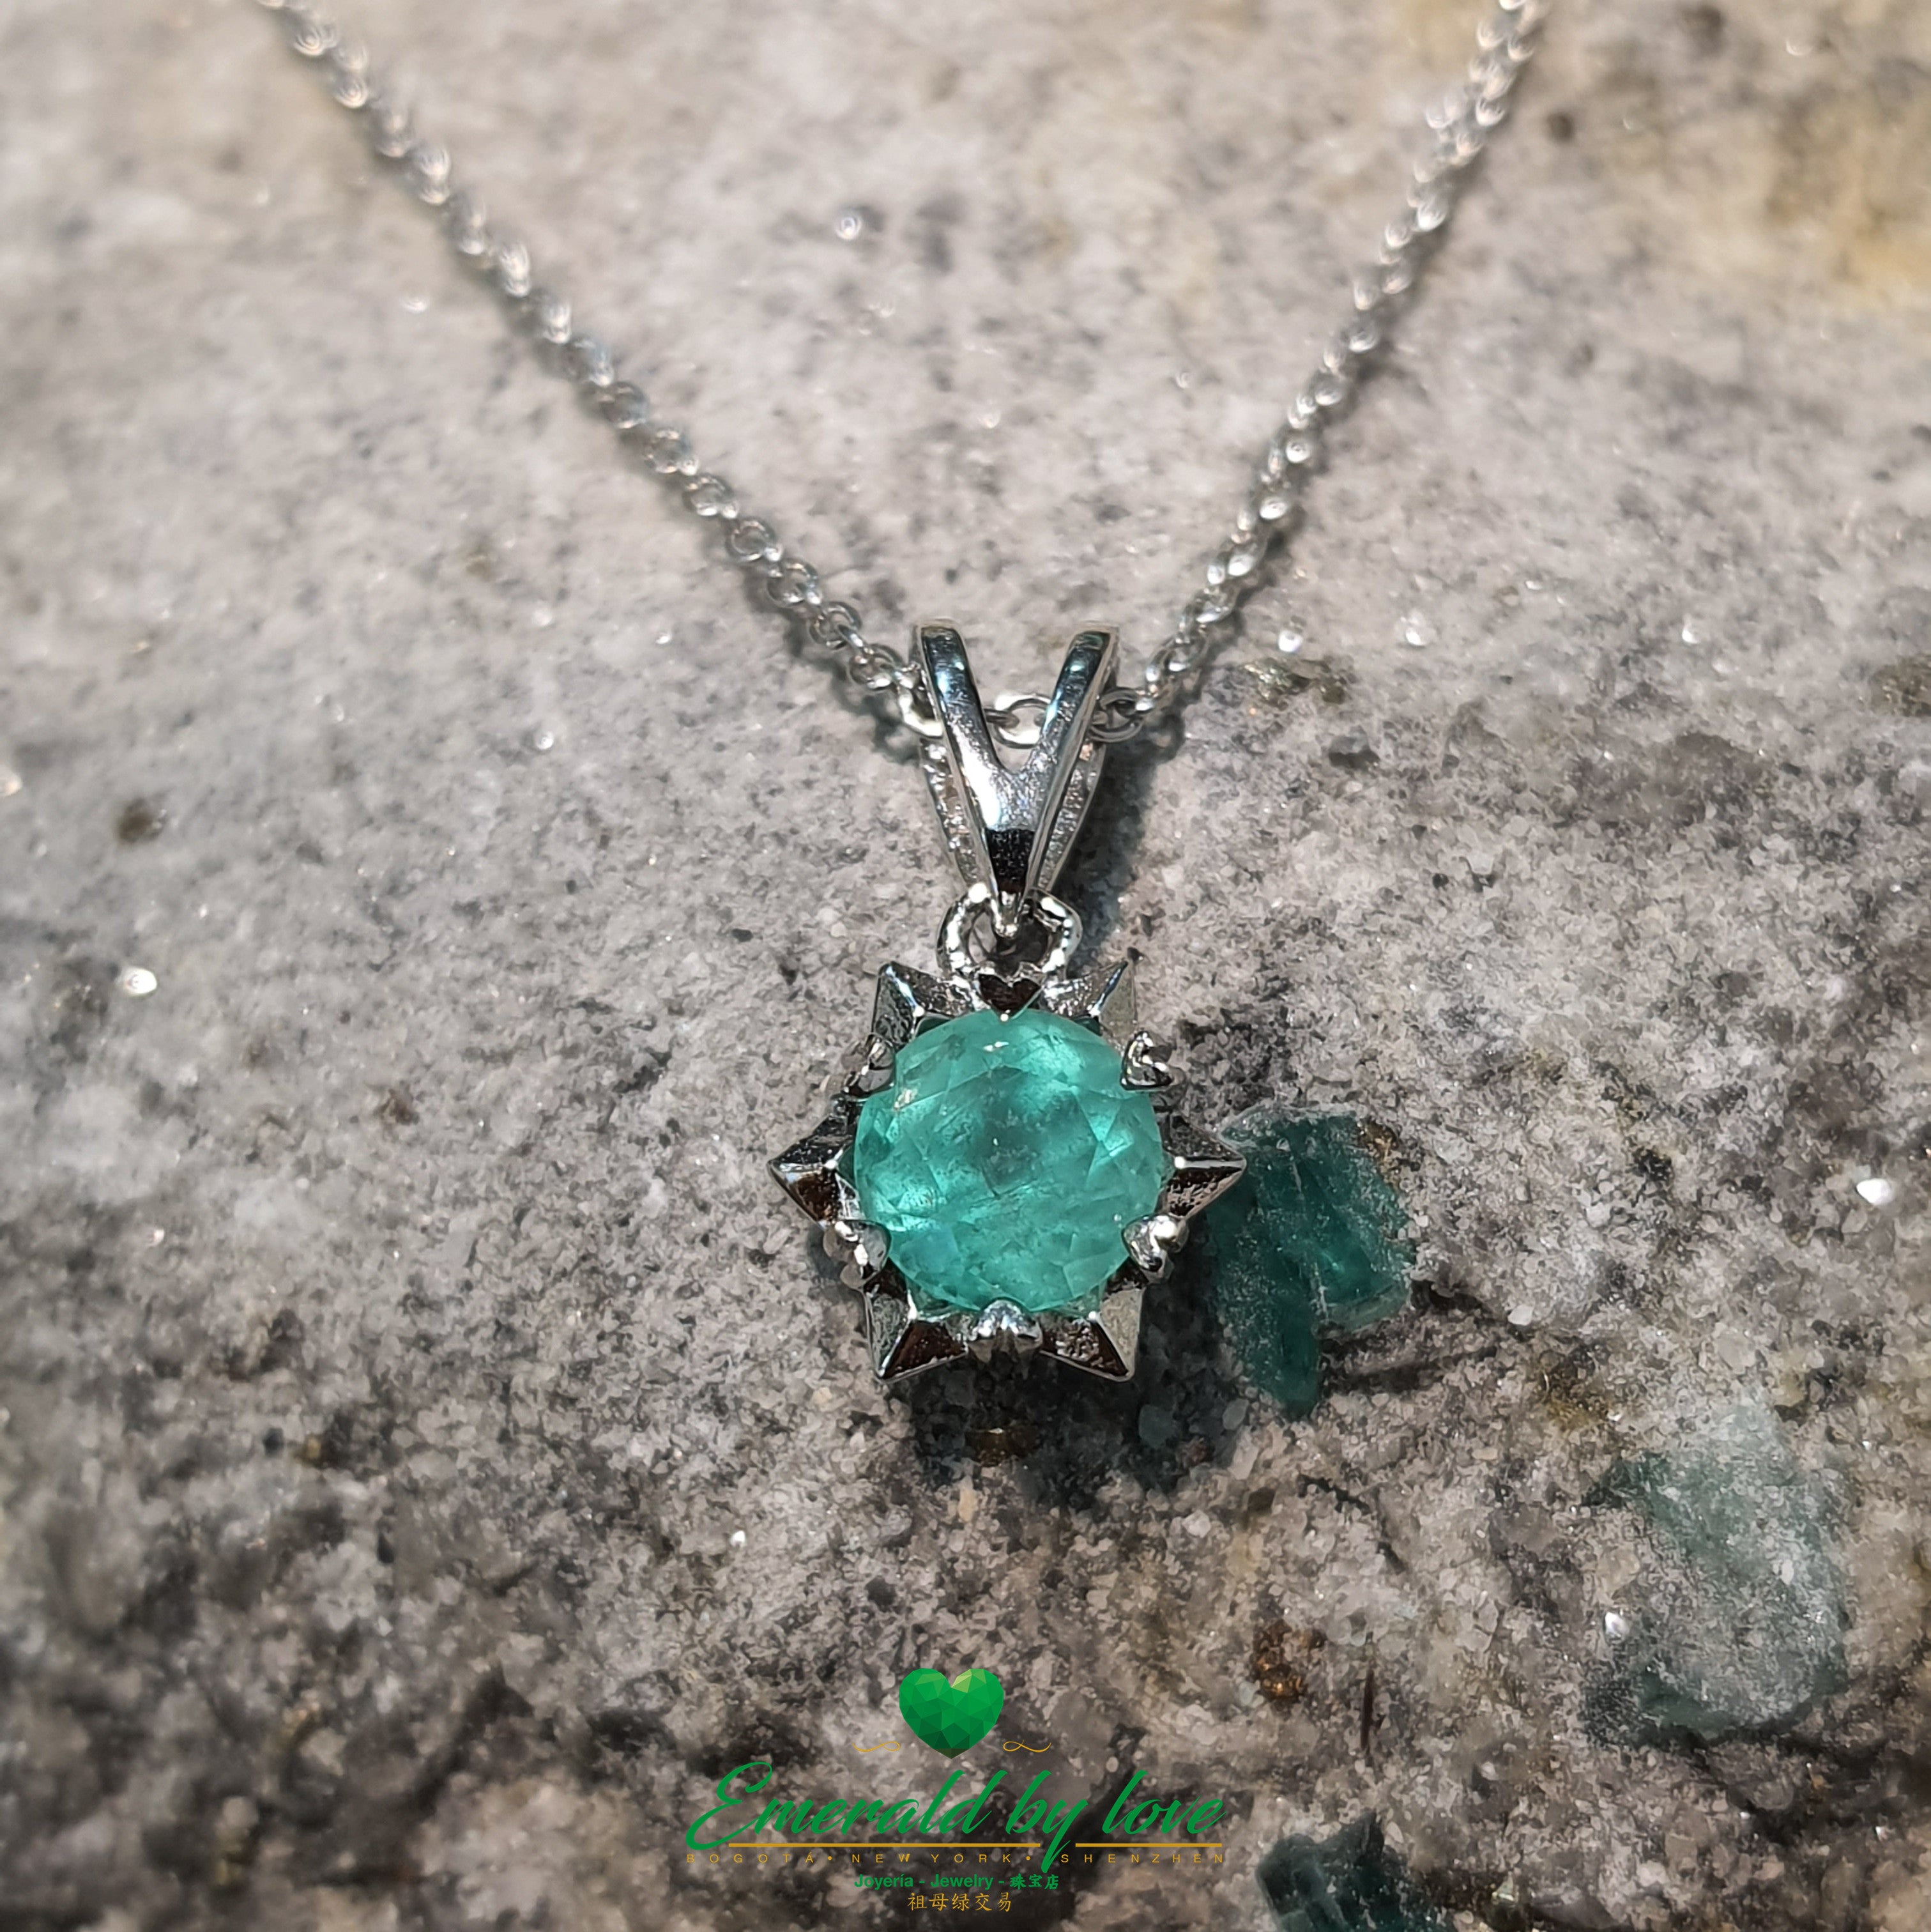 Crystal Emerald Pendant with Silver Spike Accents